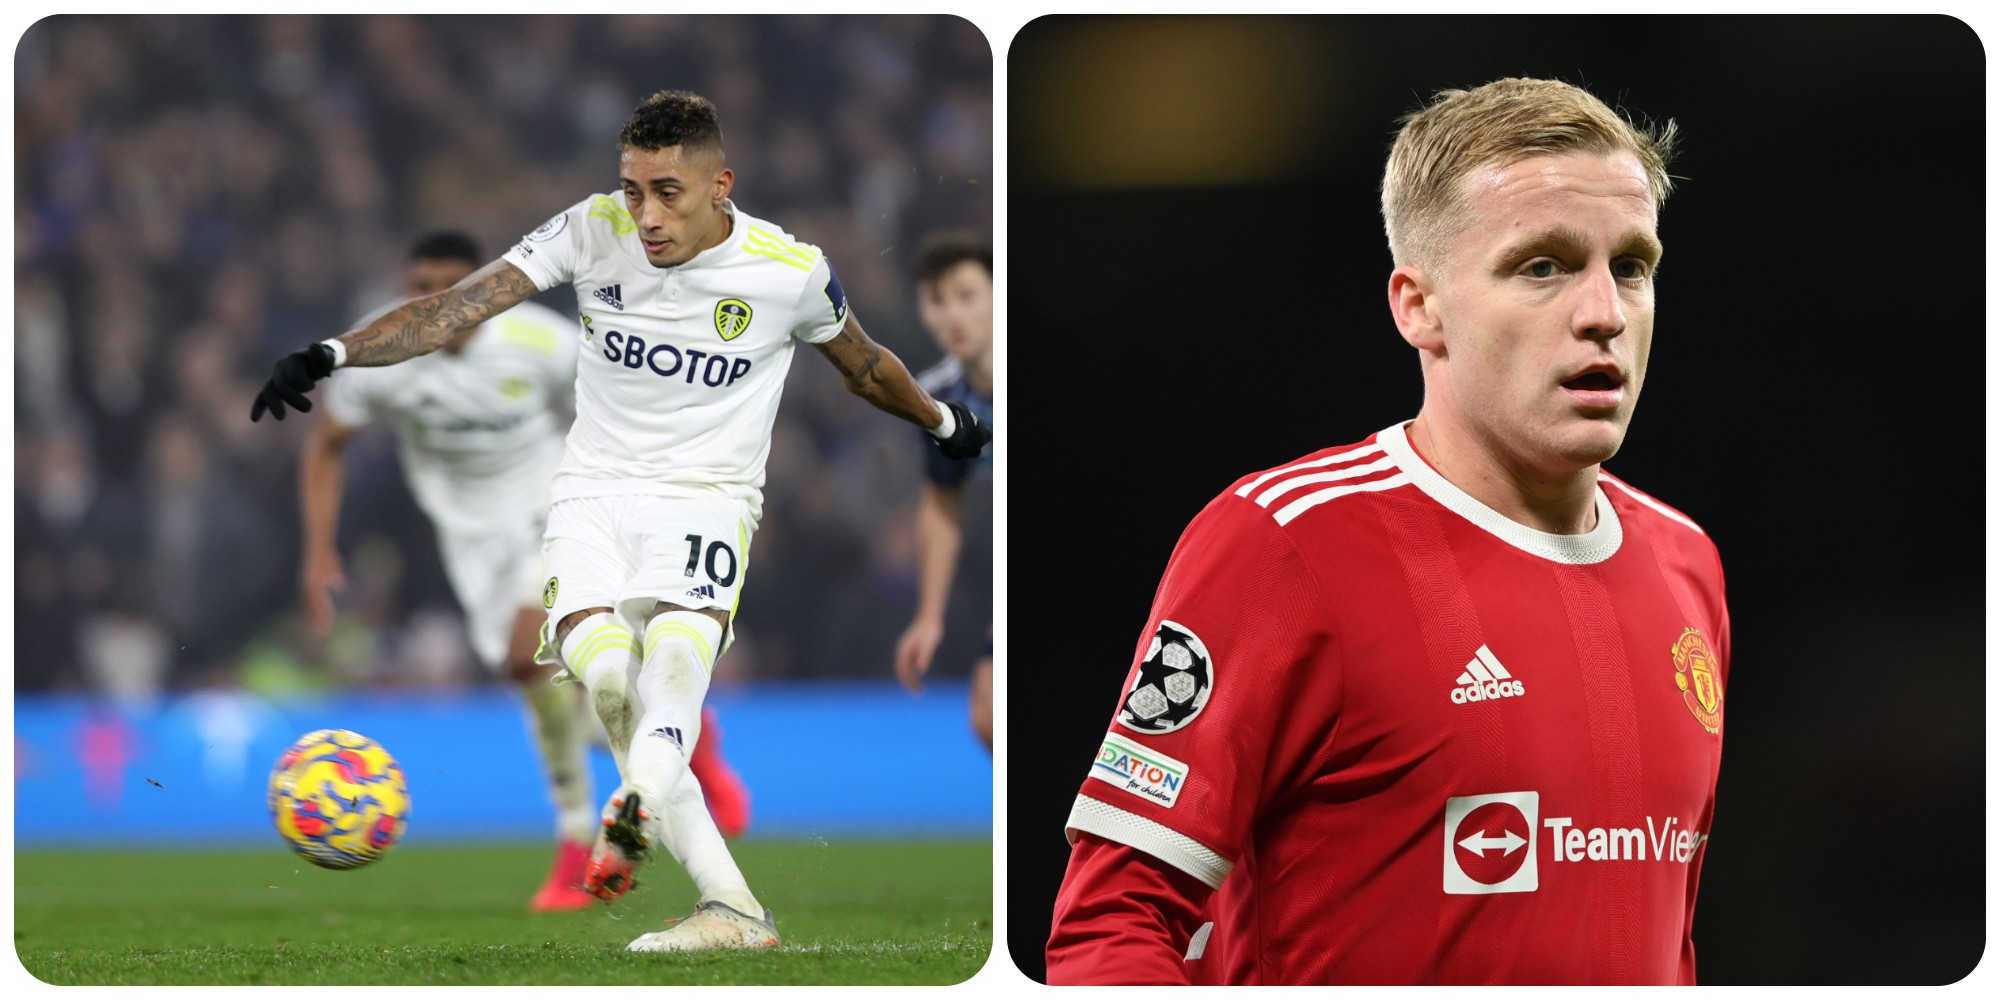  Bayern Munich rule out January transfers of Manchester United and Leeds United stars